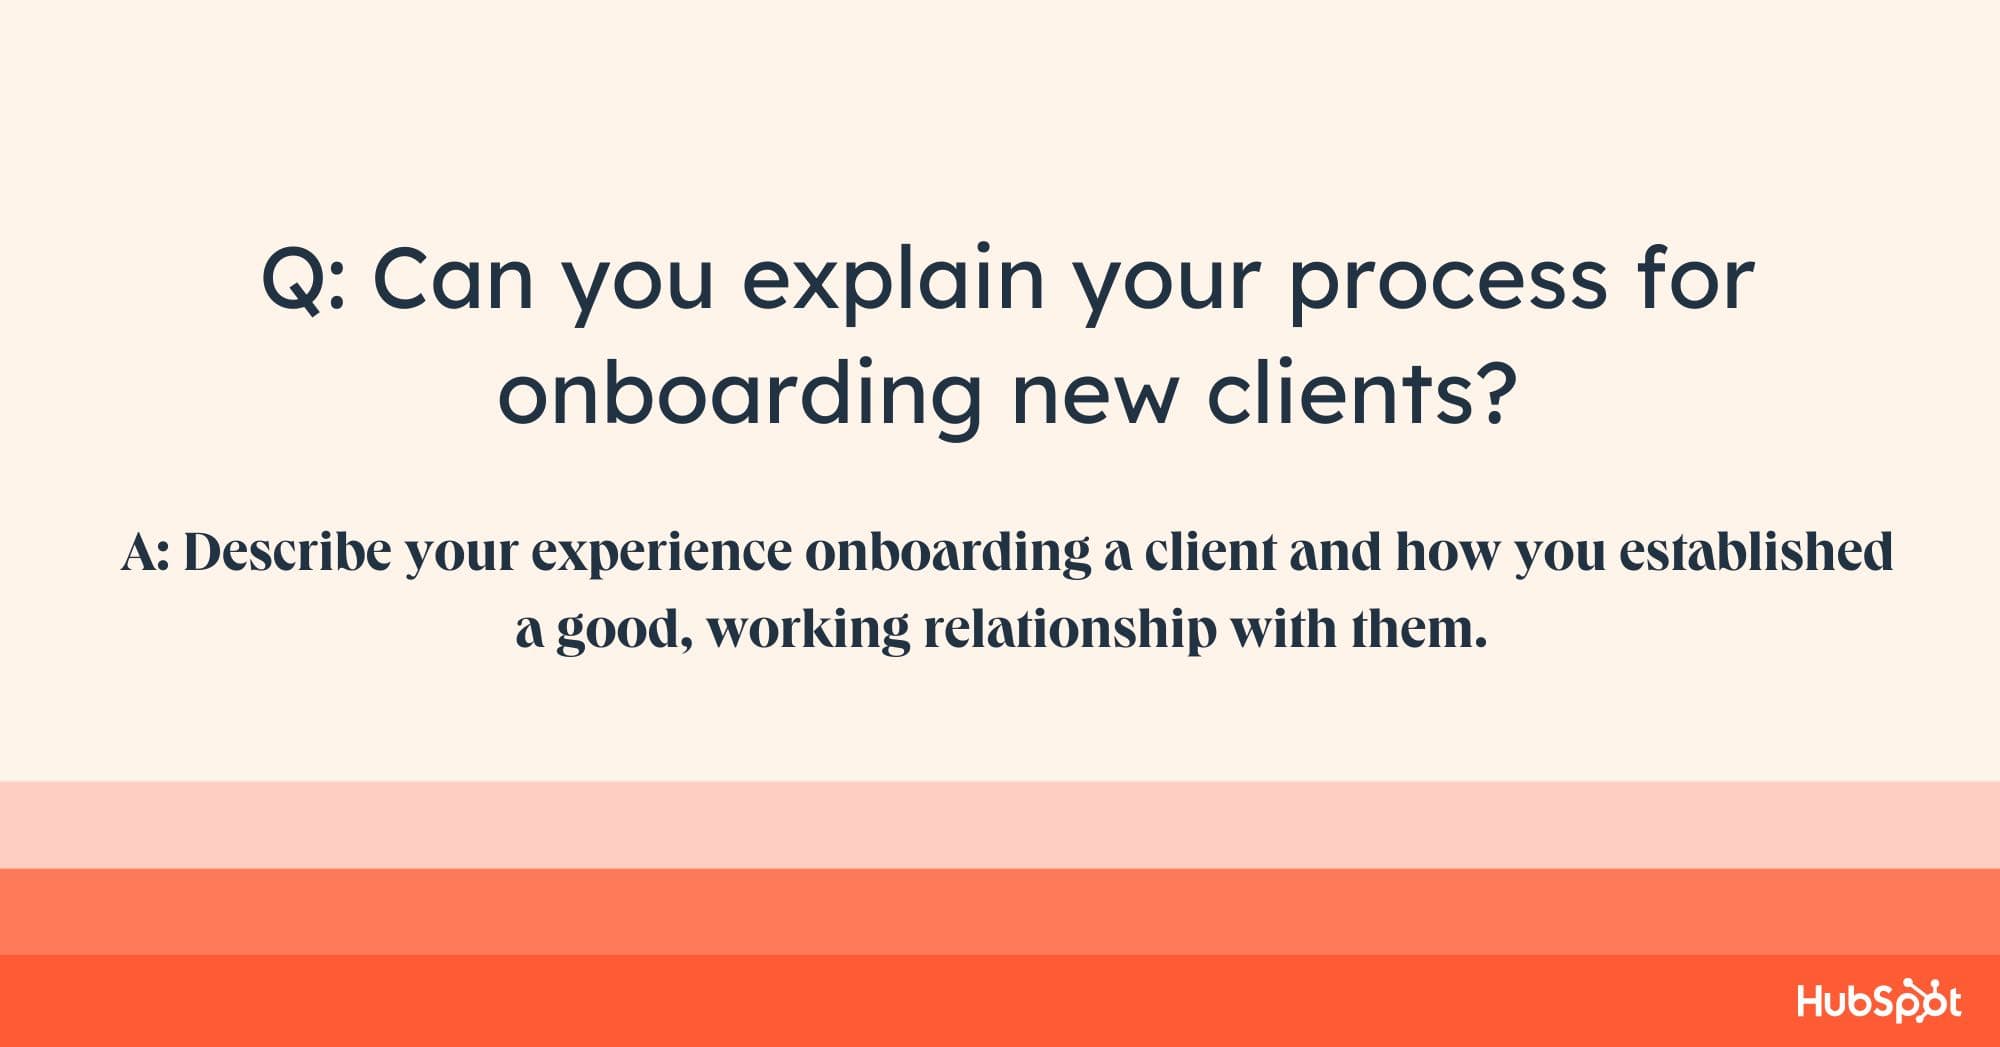 account manager interview questions, Q: Can you explain your process for onboarding new clients? A: Describe your experience onboarding a client and how you established a good, working relationship with them. 